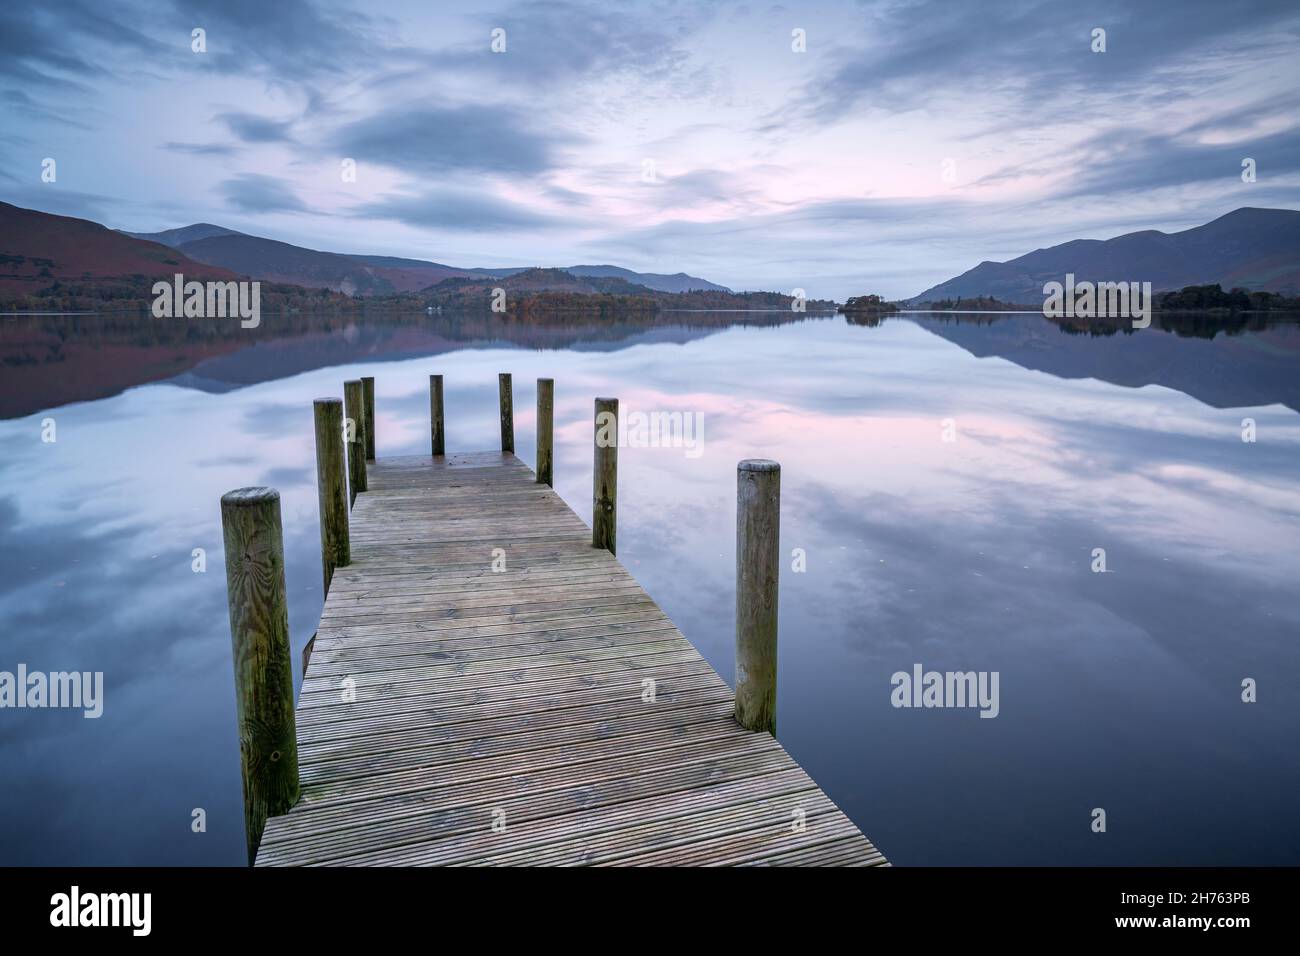 The famous Ashness Jetty on Derwentwater leads the eye towards the perfectly reflected fells surrounding the lake on a perfectly calm autumn morning. Stock Photo